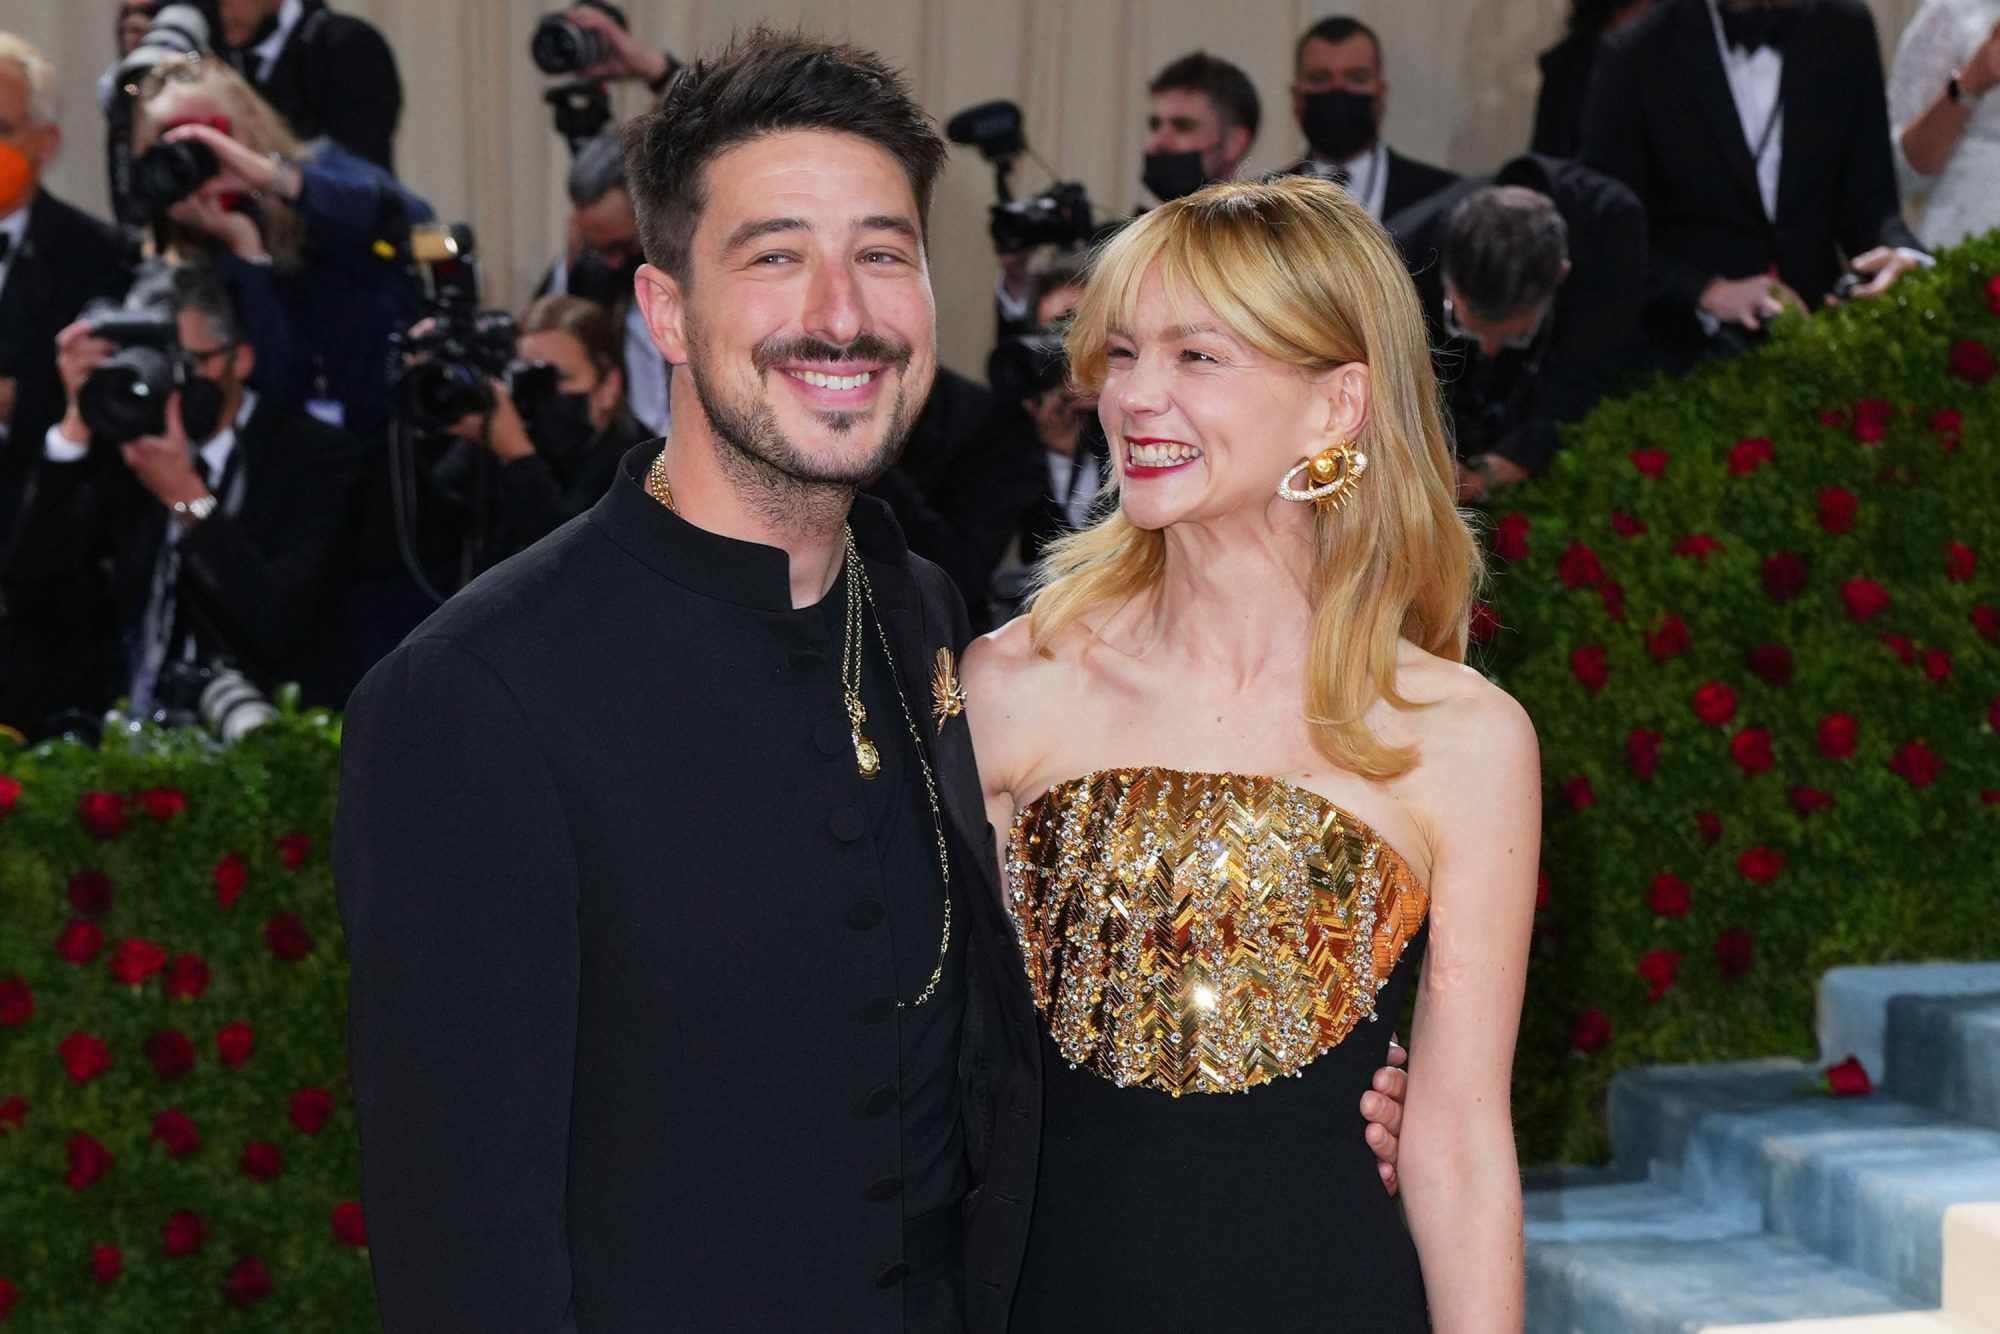 NEW YORK, NEW YORK - MAY 02: Marcus Mumford and Carey Mulligan attend The 2022 Met Gala Celebrating "In America: An Anthology of Fashion" at The Metropolitan Museum of Art on May 2, 2022 in New York City. (Photo by Gotham/Getty Images)